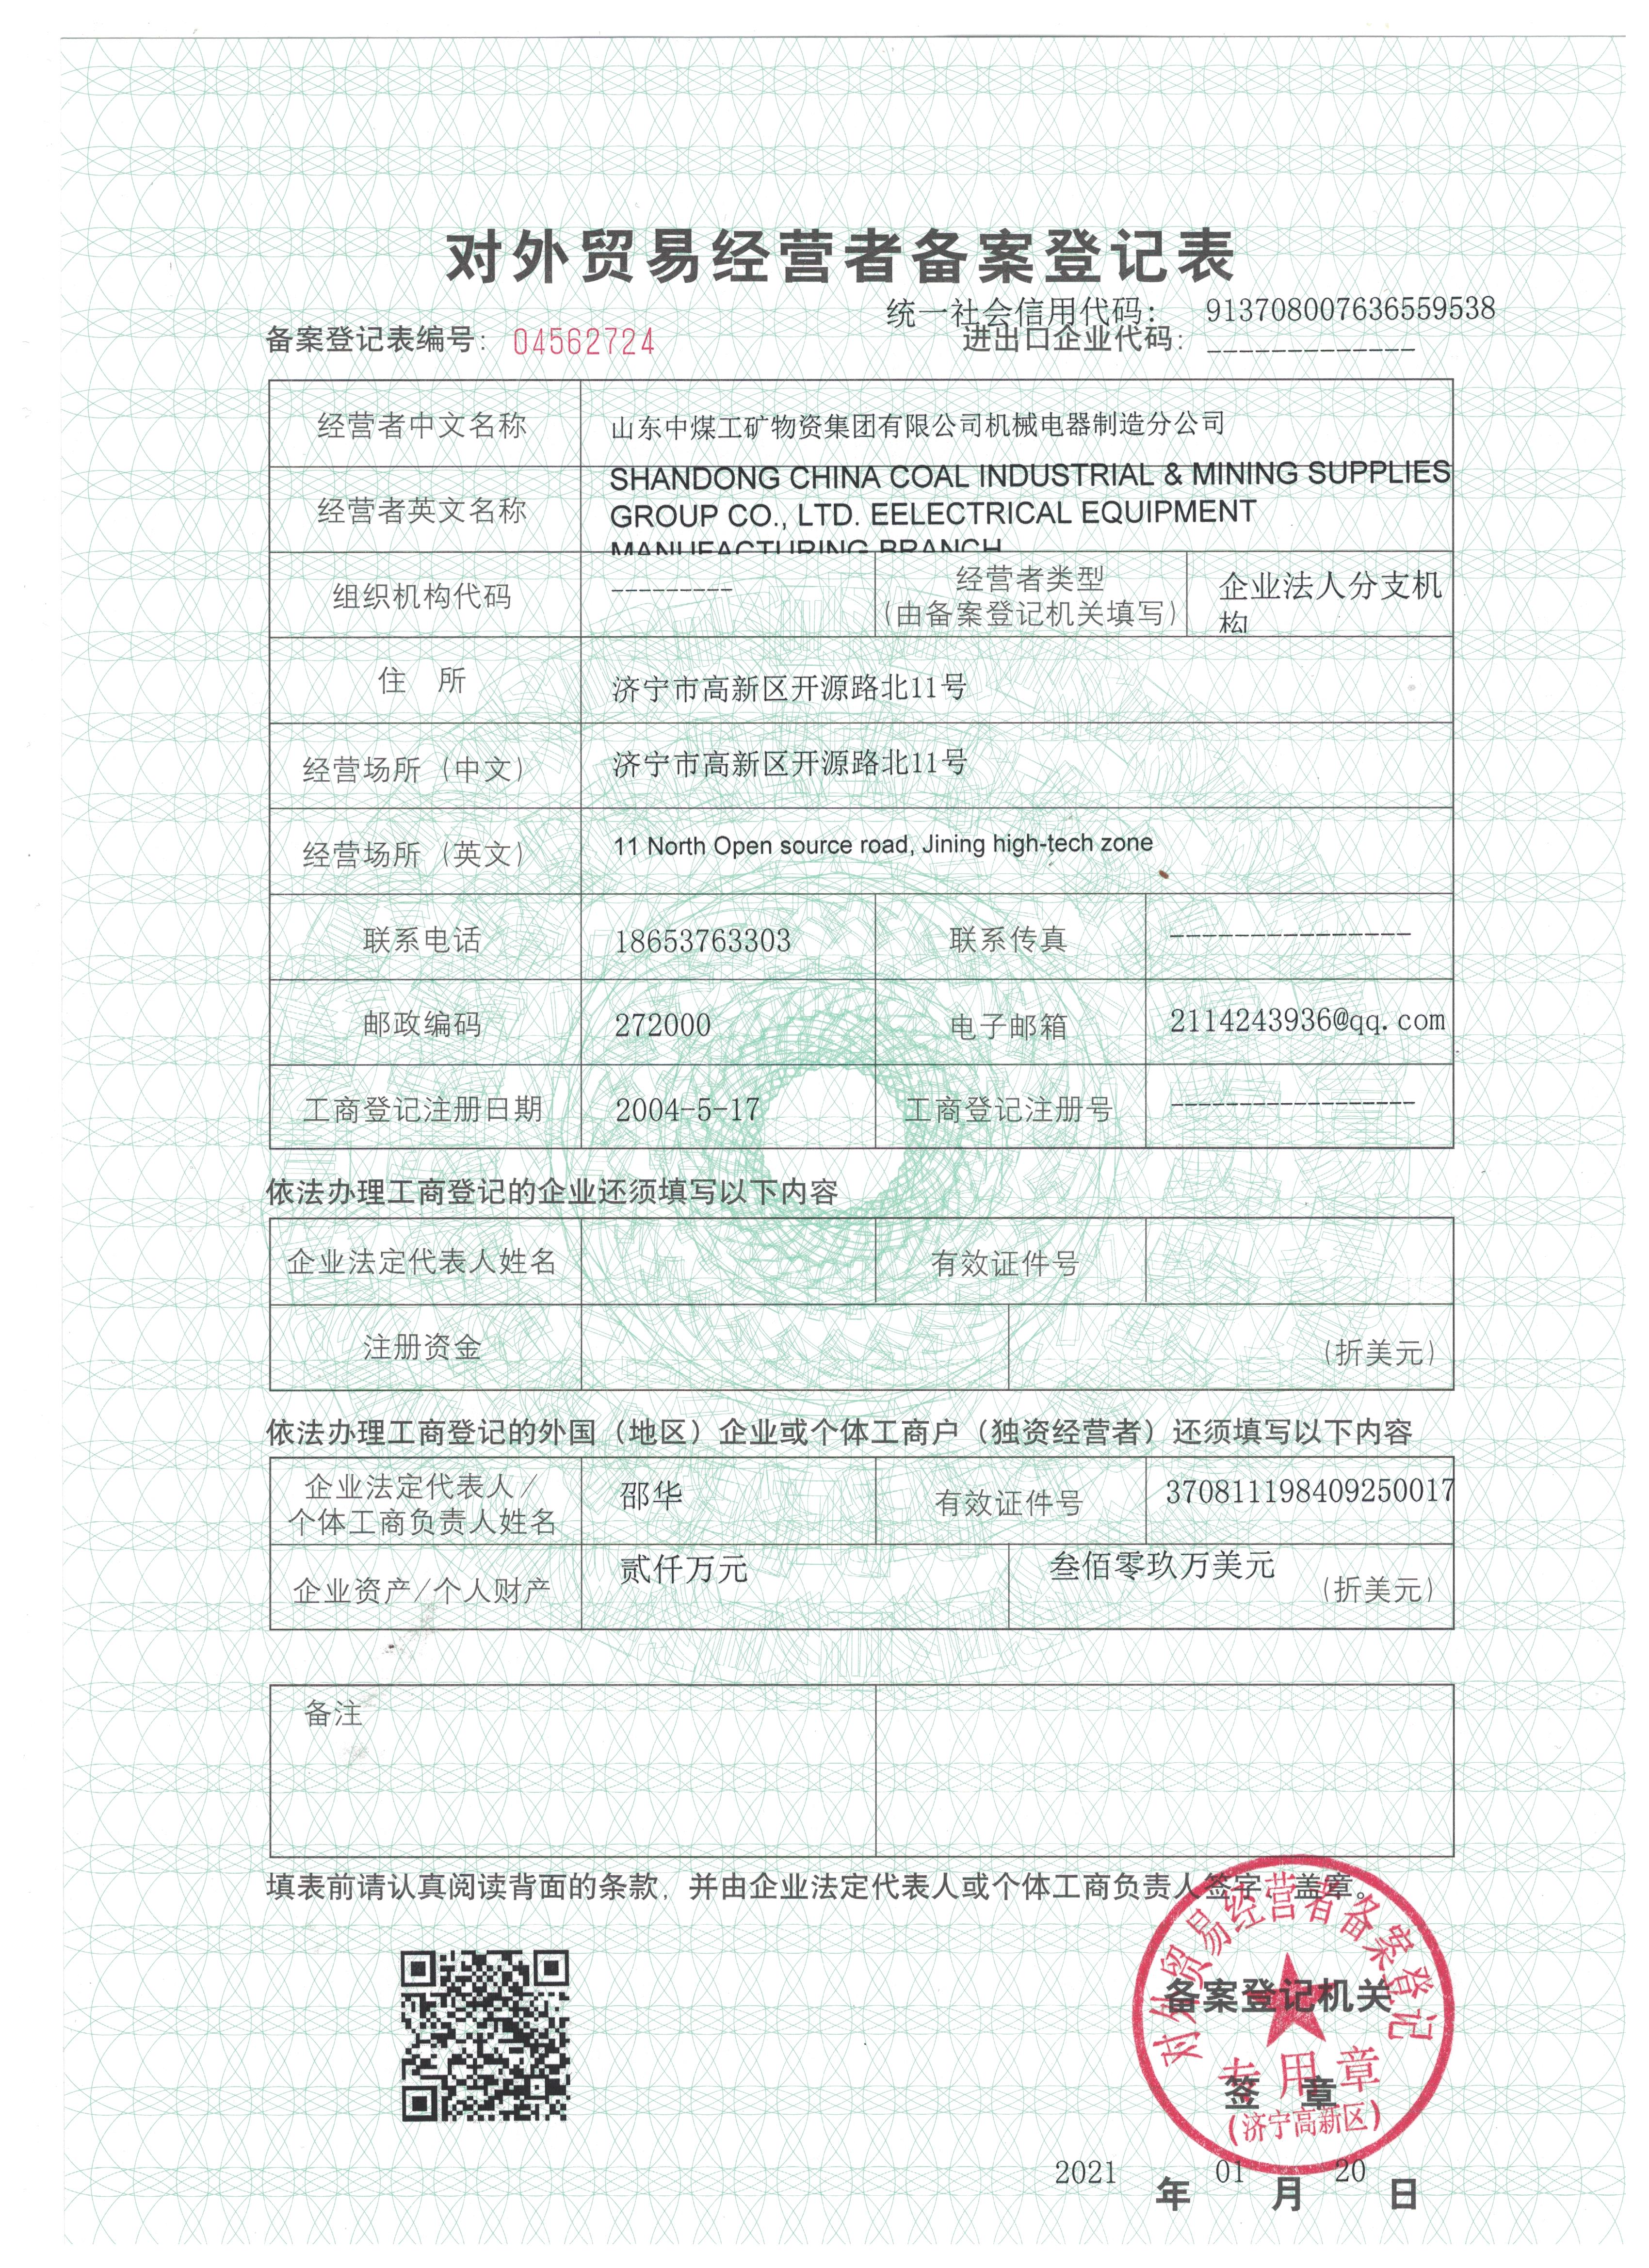 foreign trade Record registration form